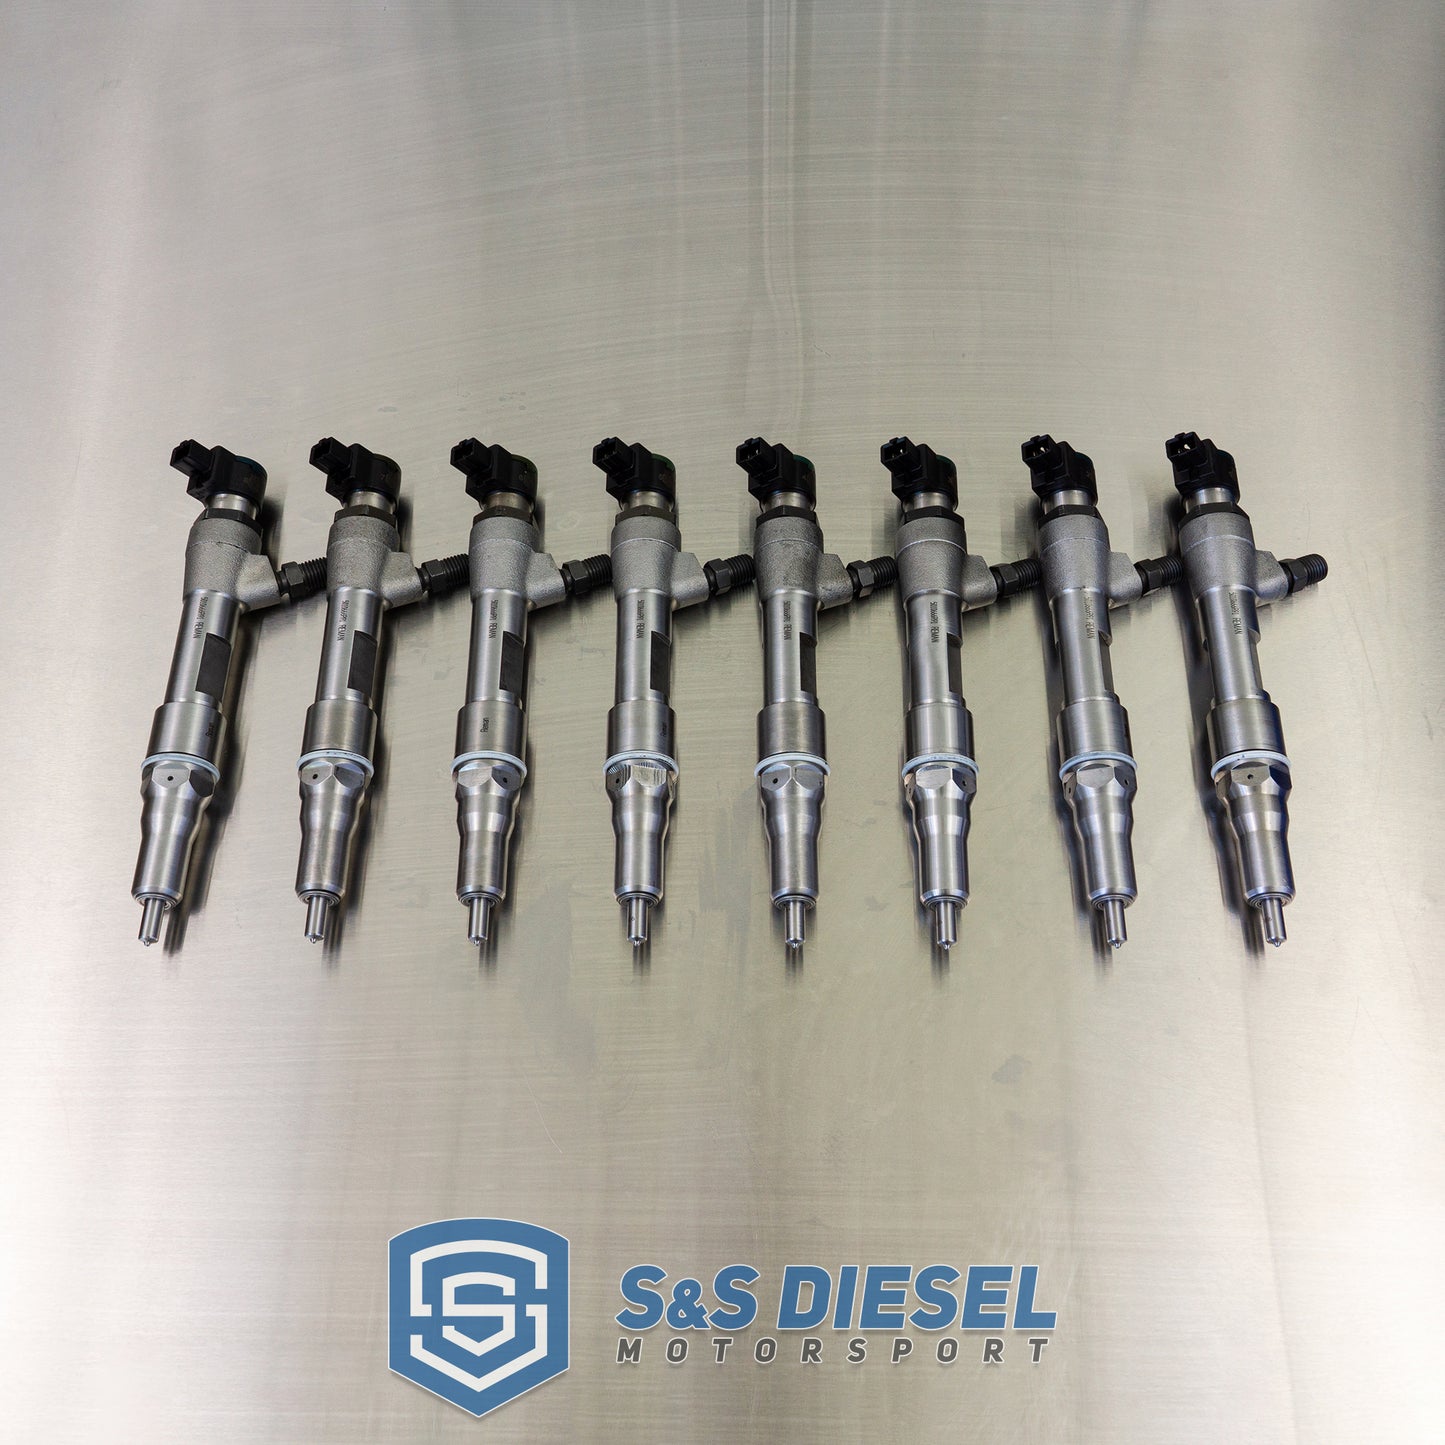 6.0L Ford Powerstroke Injectors "INDIVIDUAL"